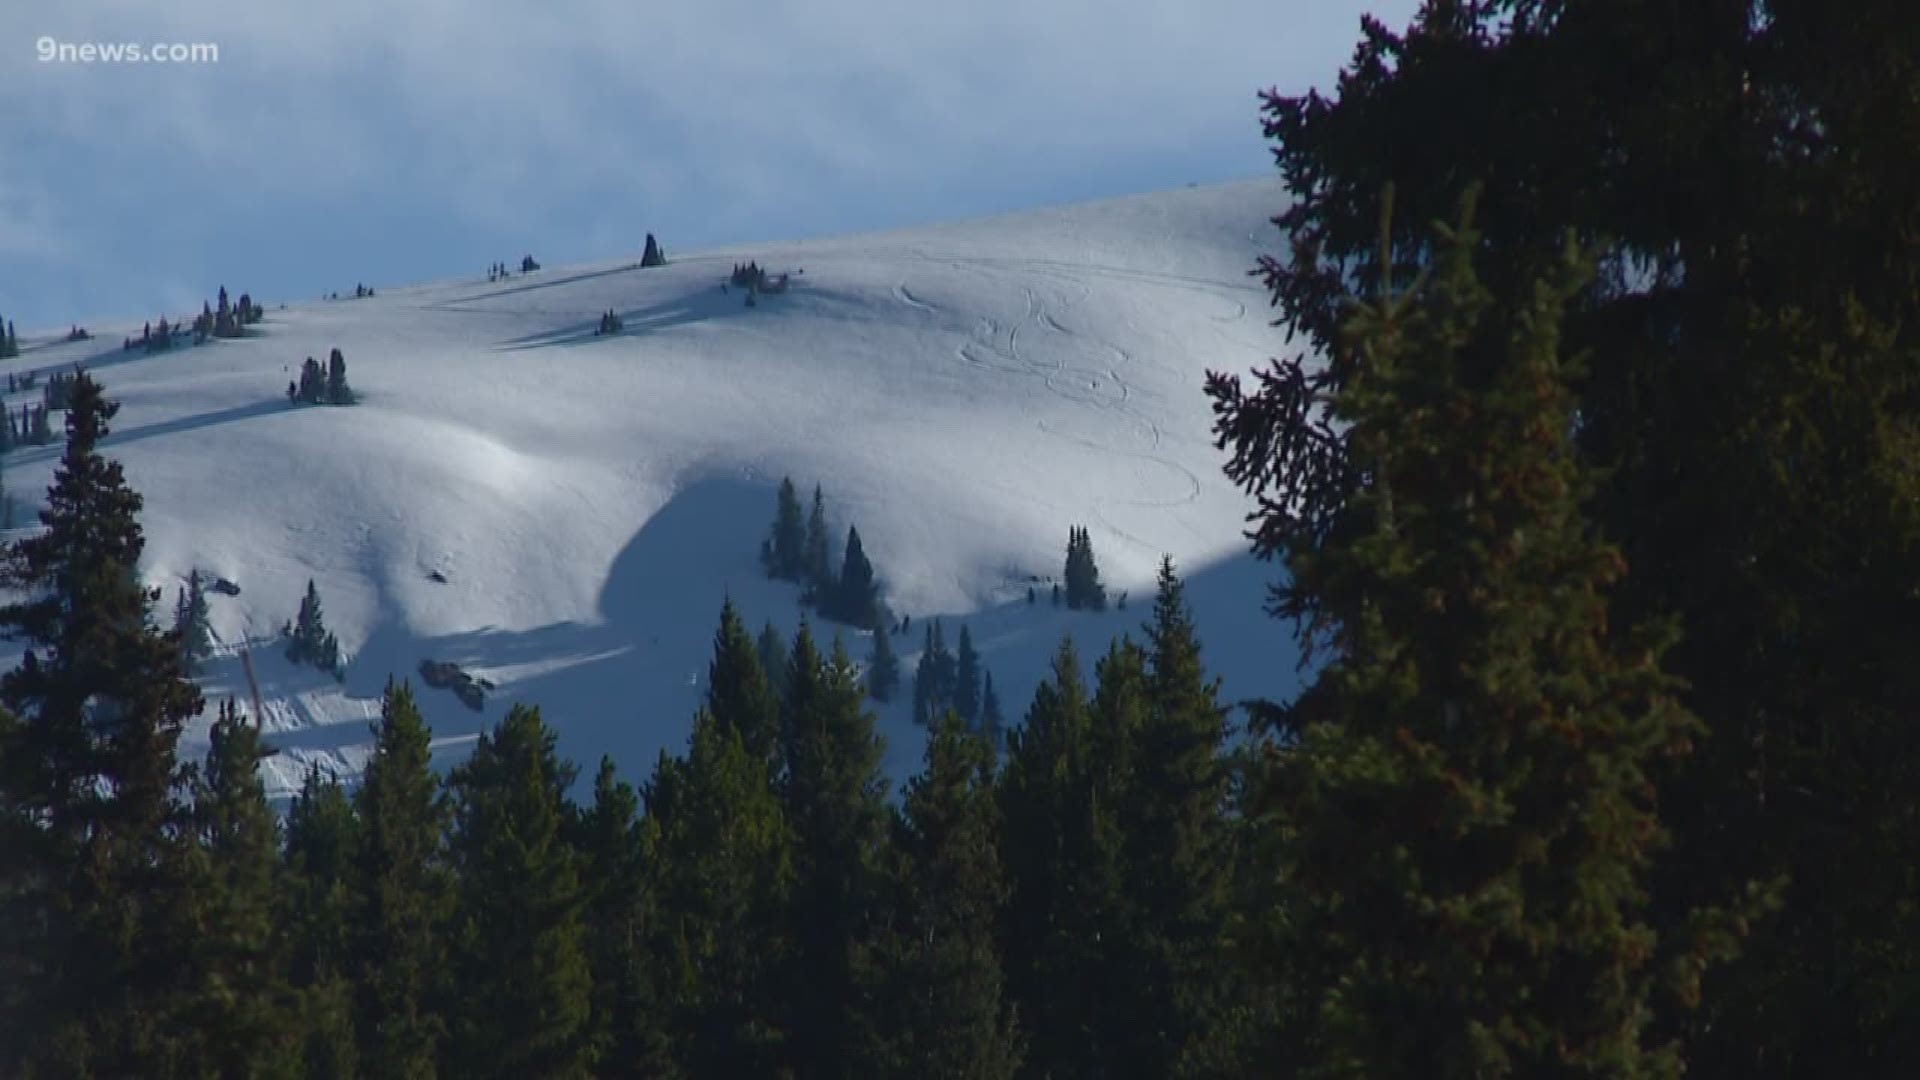 The summer hiking season has arrived but there’s still a lot of snow covering trails at higher elevations -- and that has search and rescue teams warning people to be prepared.